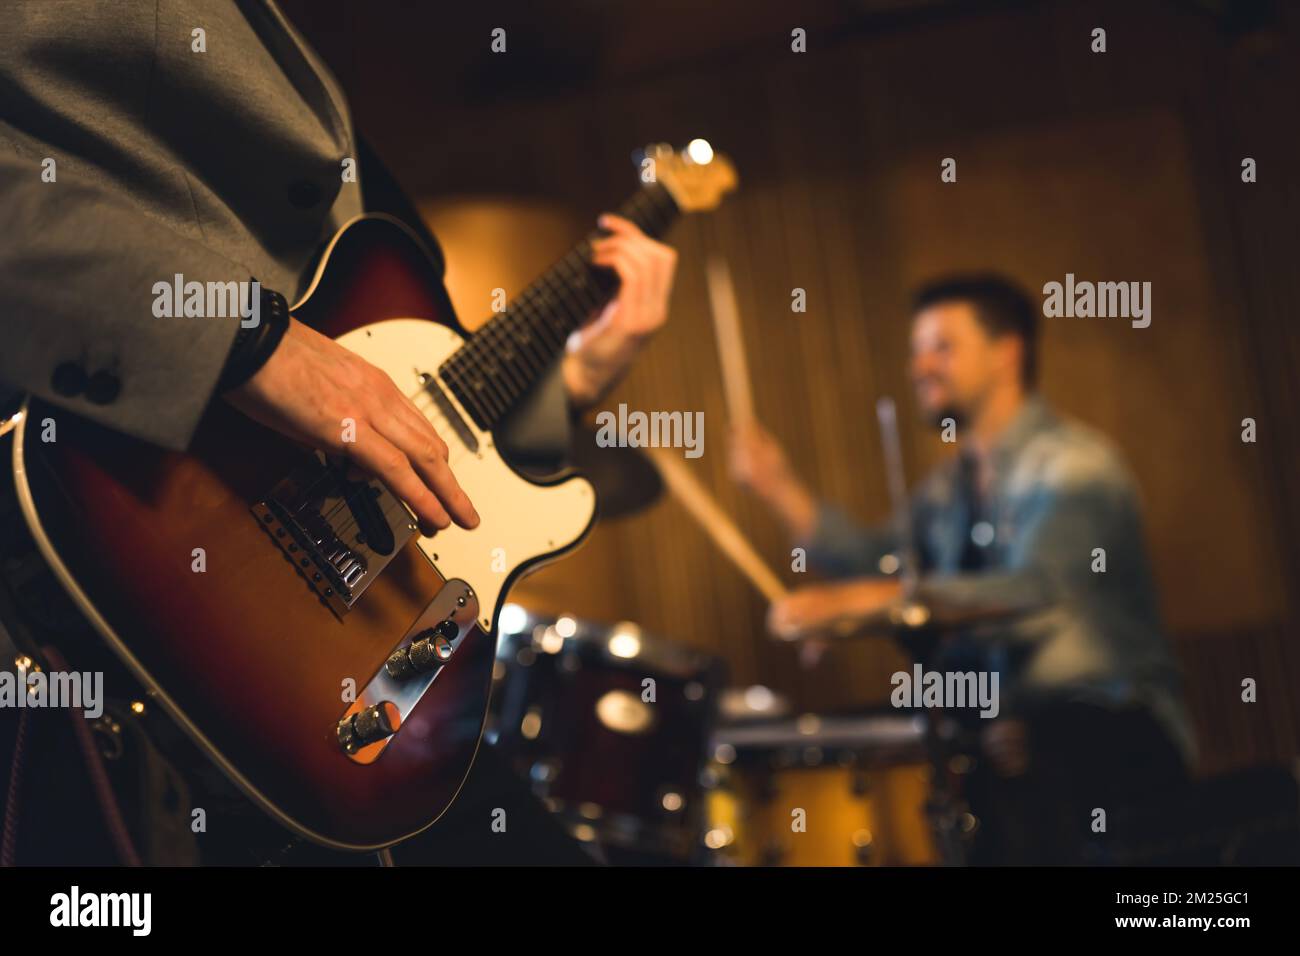 Band concert concept. Unrecognizable person playing electric guitar in the foreground. Blurred drummer in the background. High quality photo Stock Photo